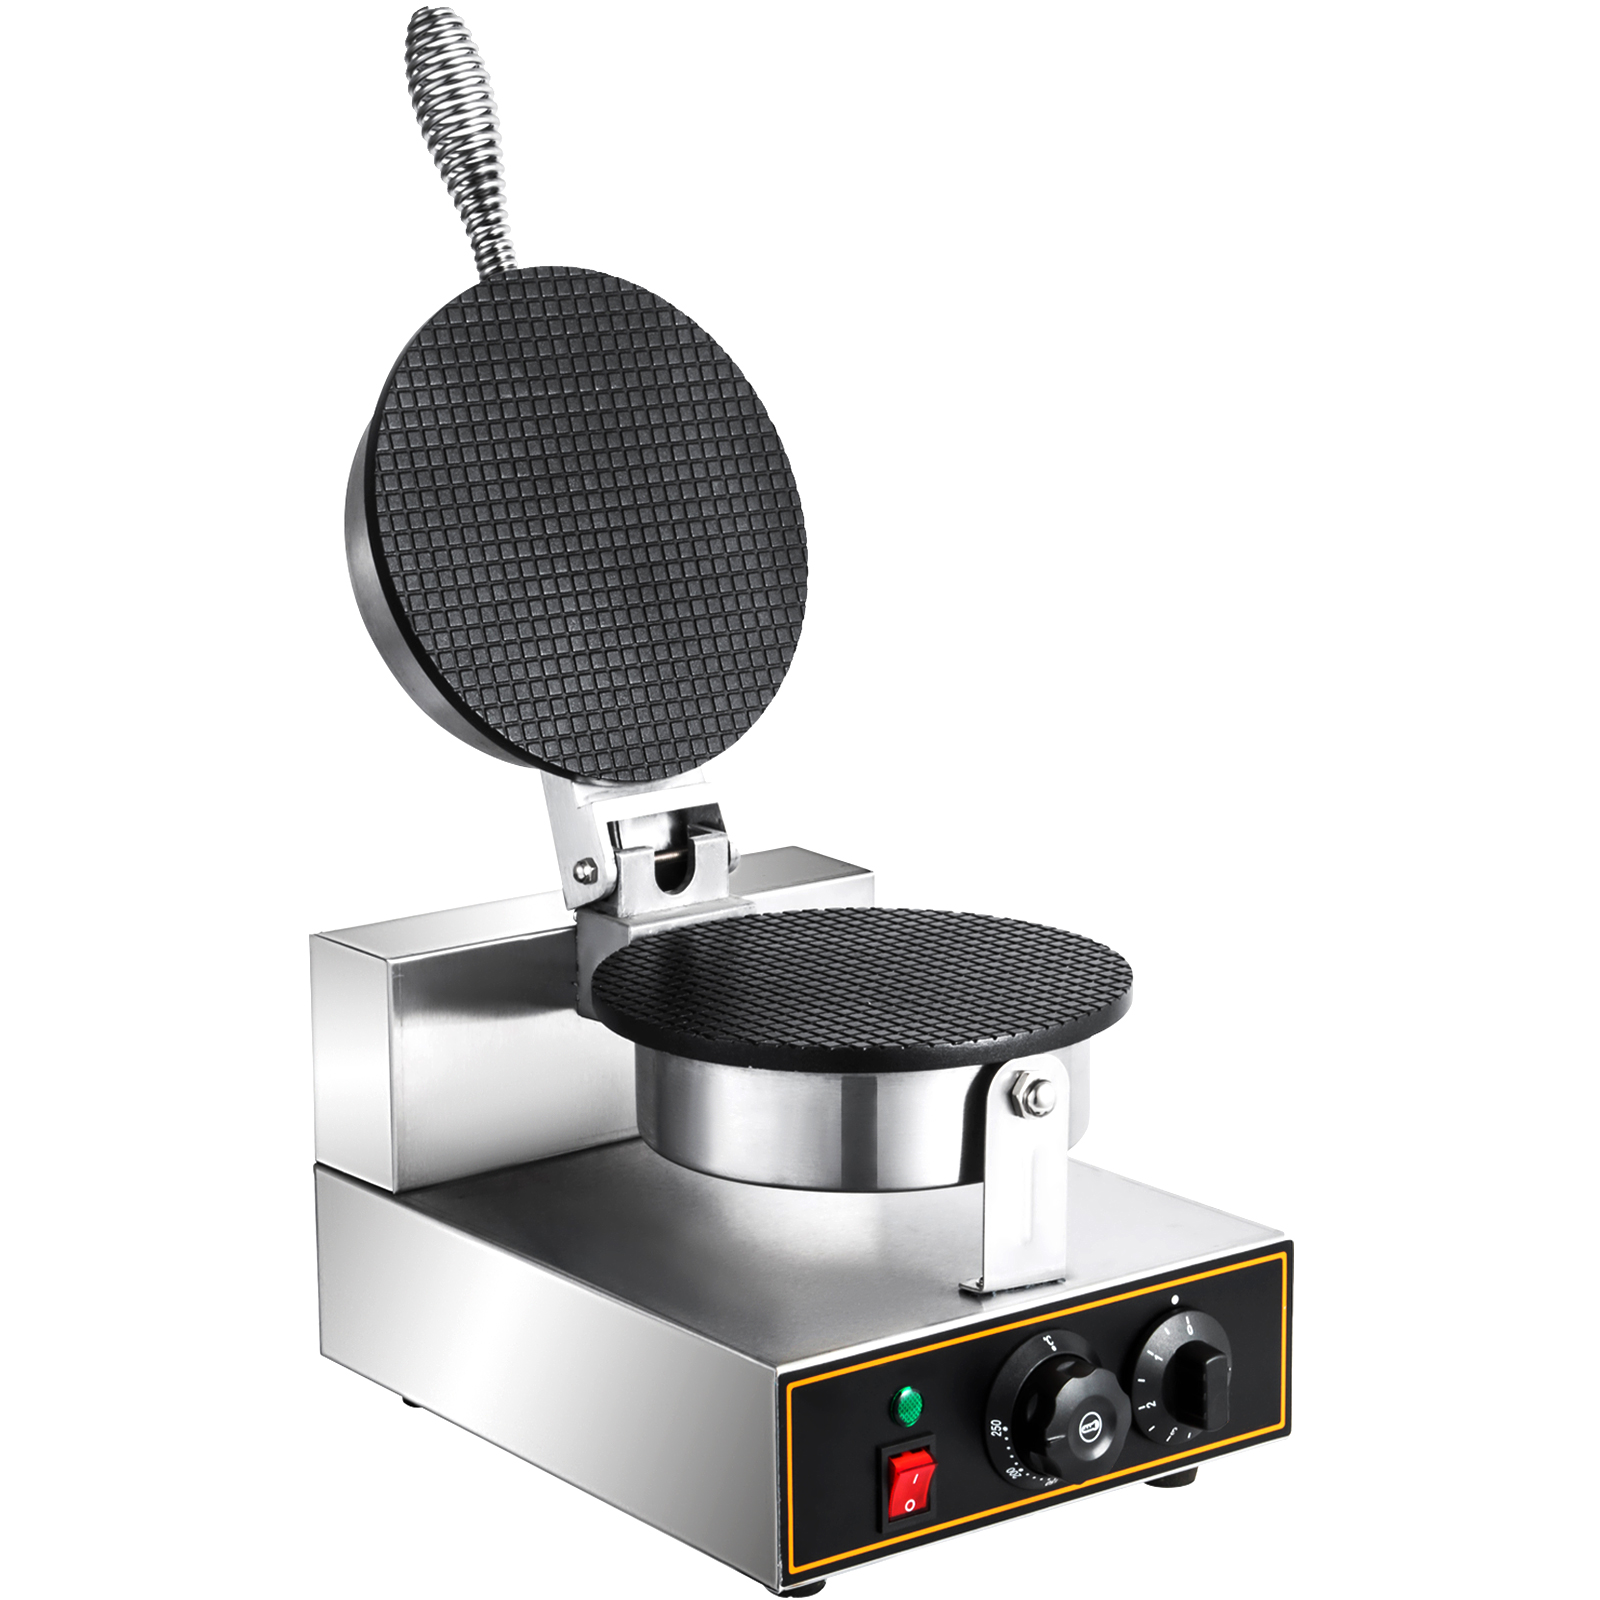 https://d2qc09rl1gfuof.cloudfront.net/product/XST-2DTJ000000001/cone-waffle-maker-m100-1.2.jpg